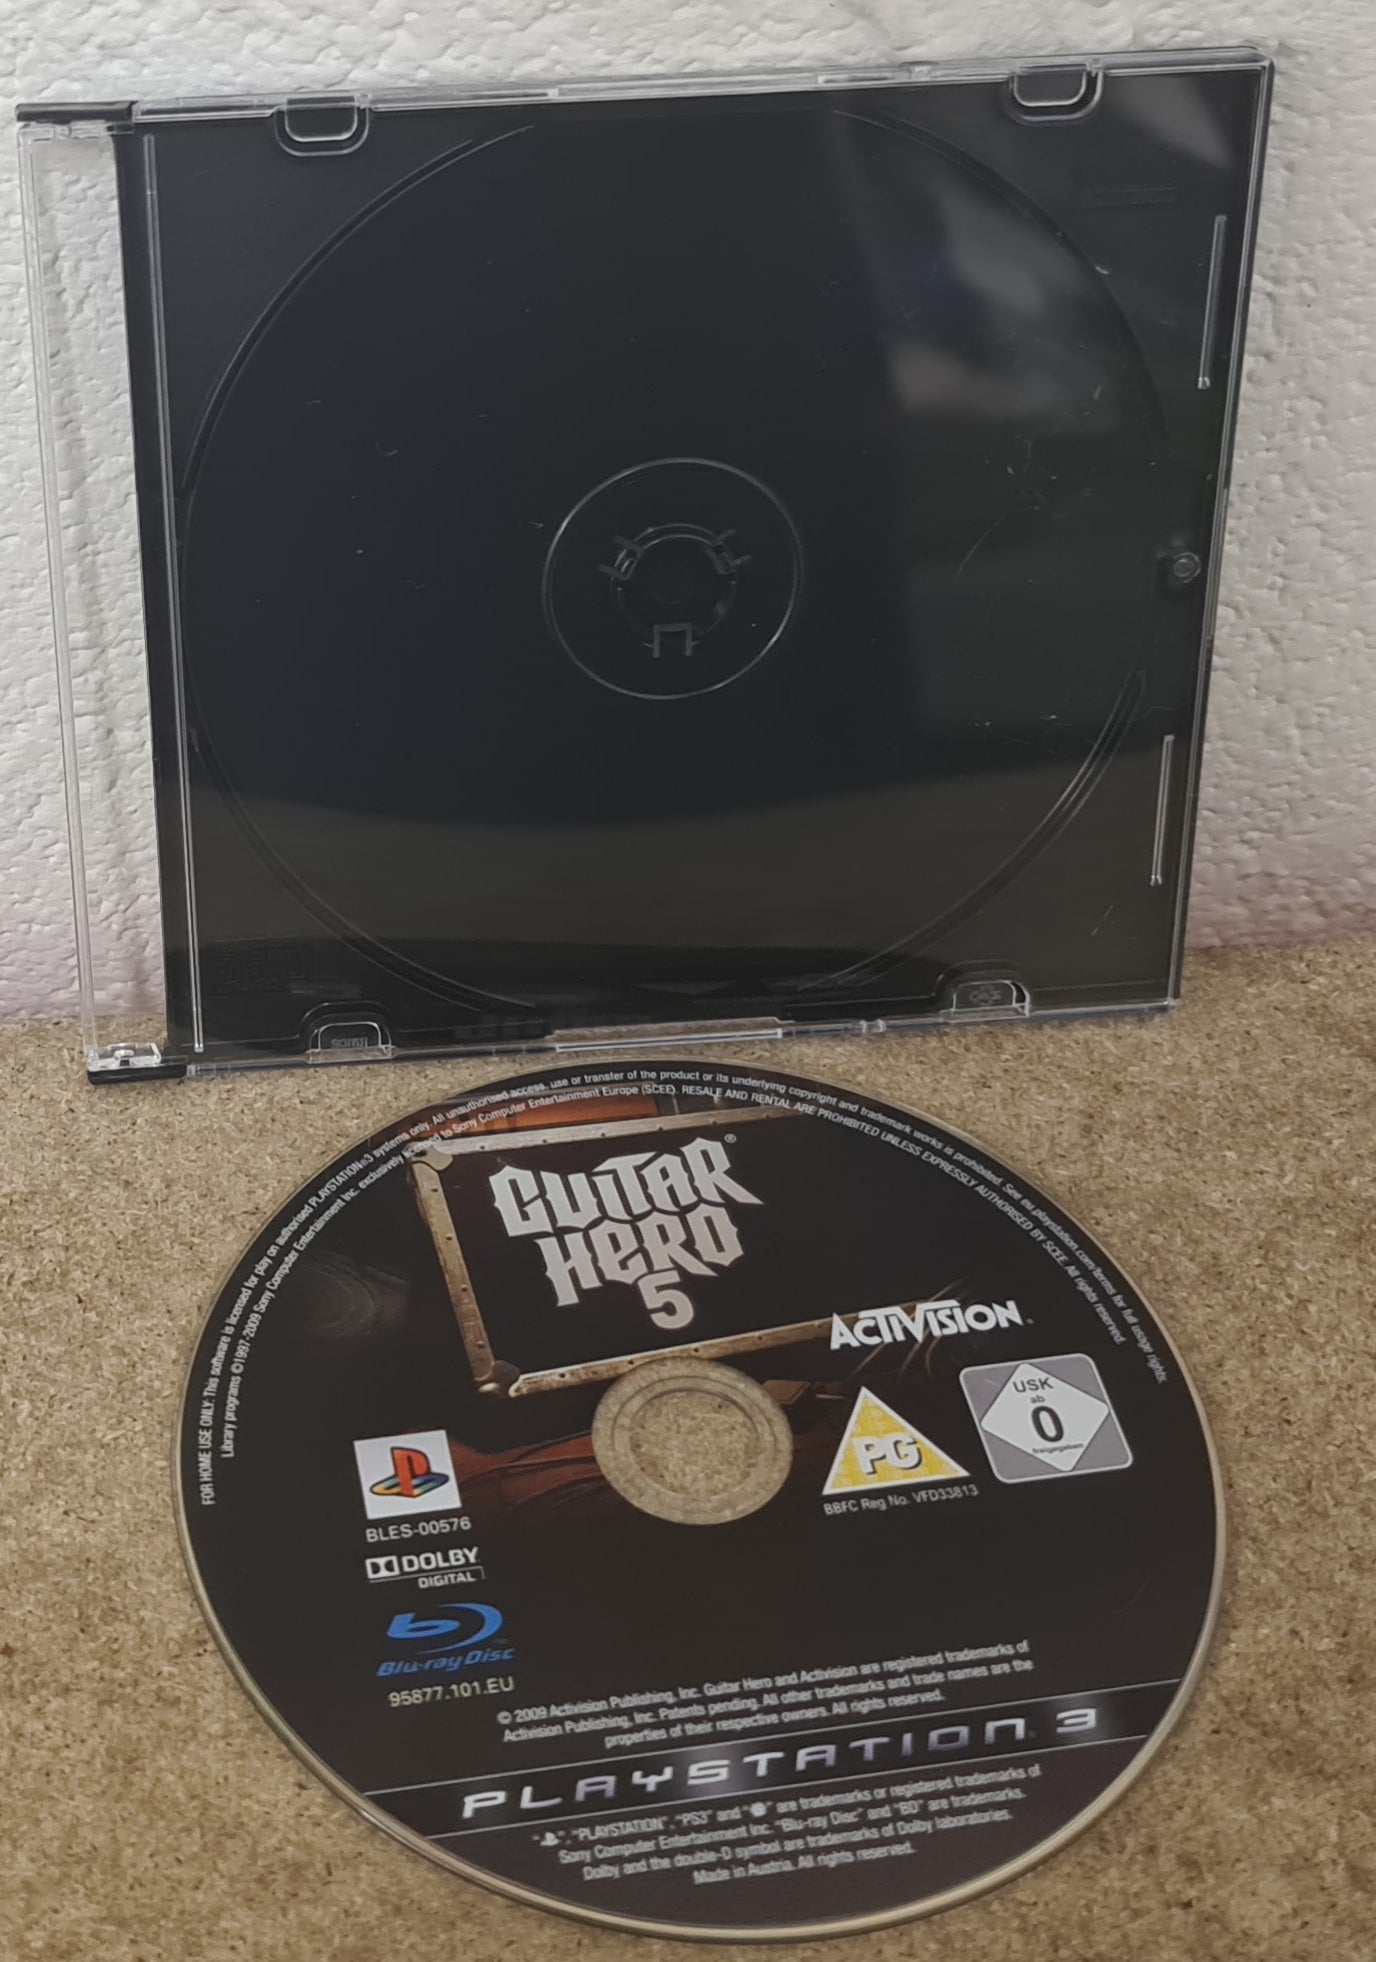 Guitar Hero 5 Sony Playstation 3 (PS3) Game Disc Only